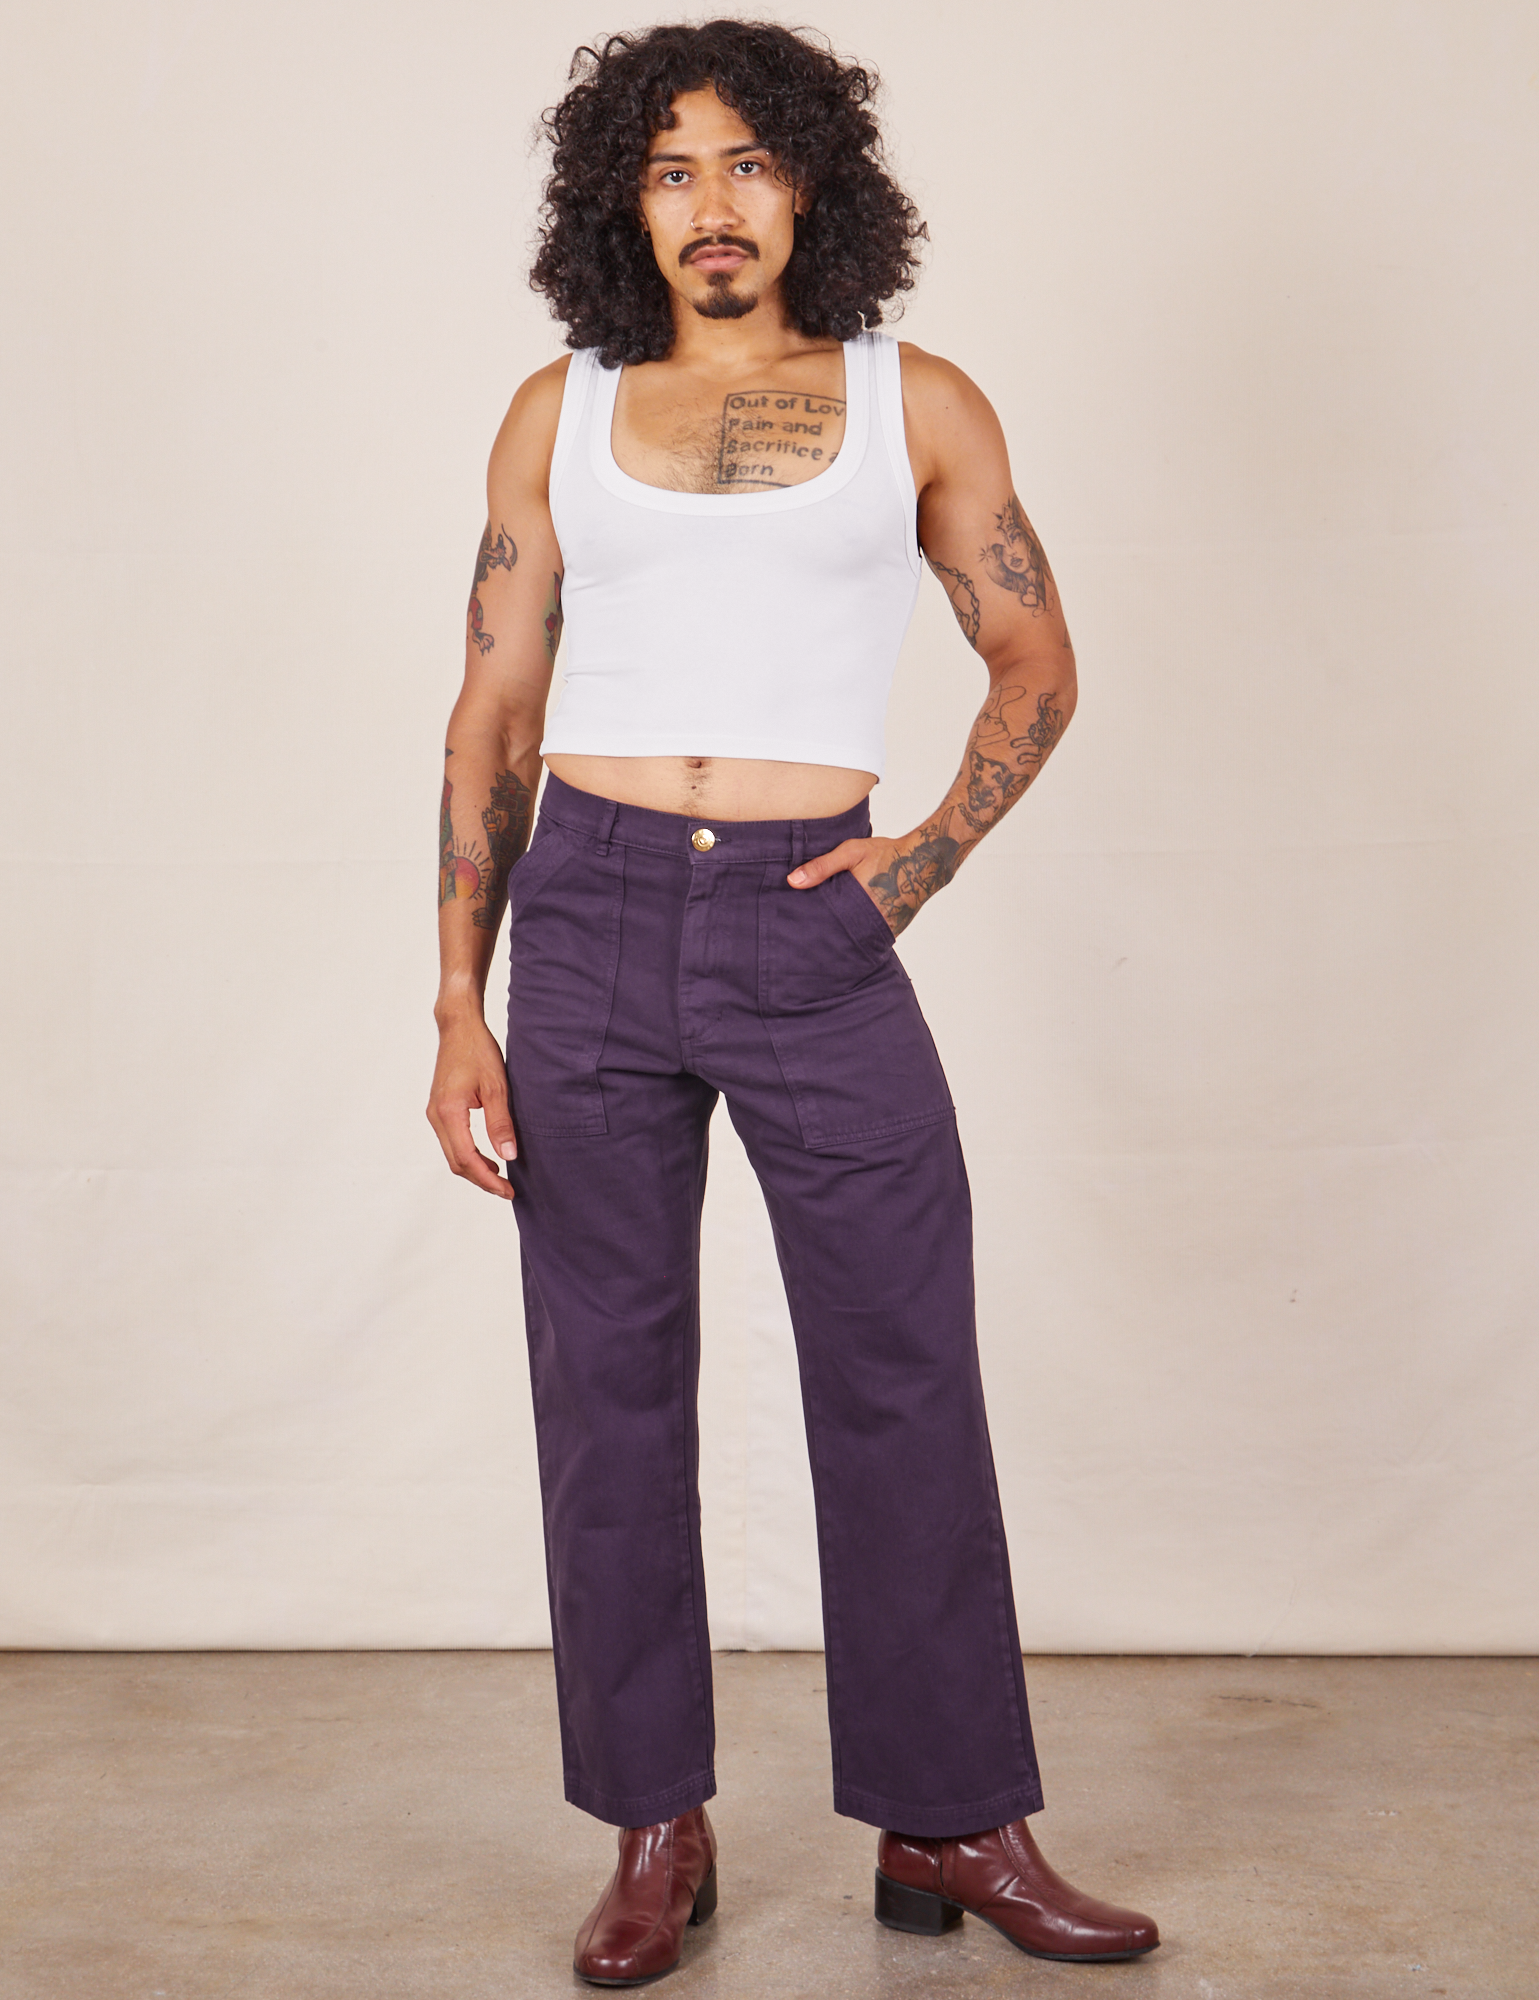 Jesse is 5&#39;8&quot; and wearing XS Work Pants in Nebula Purple